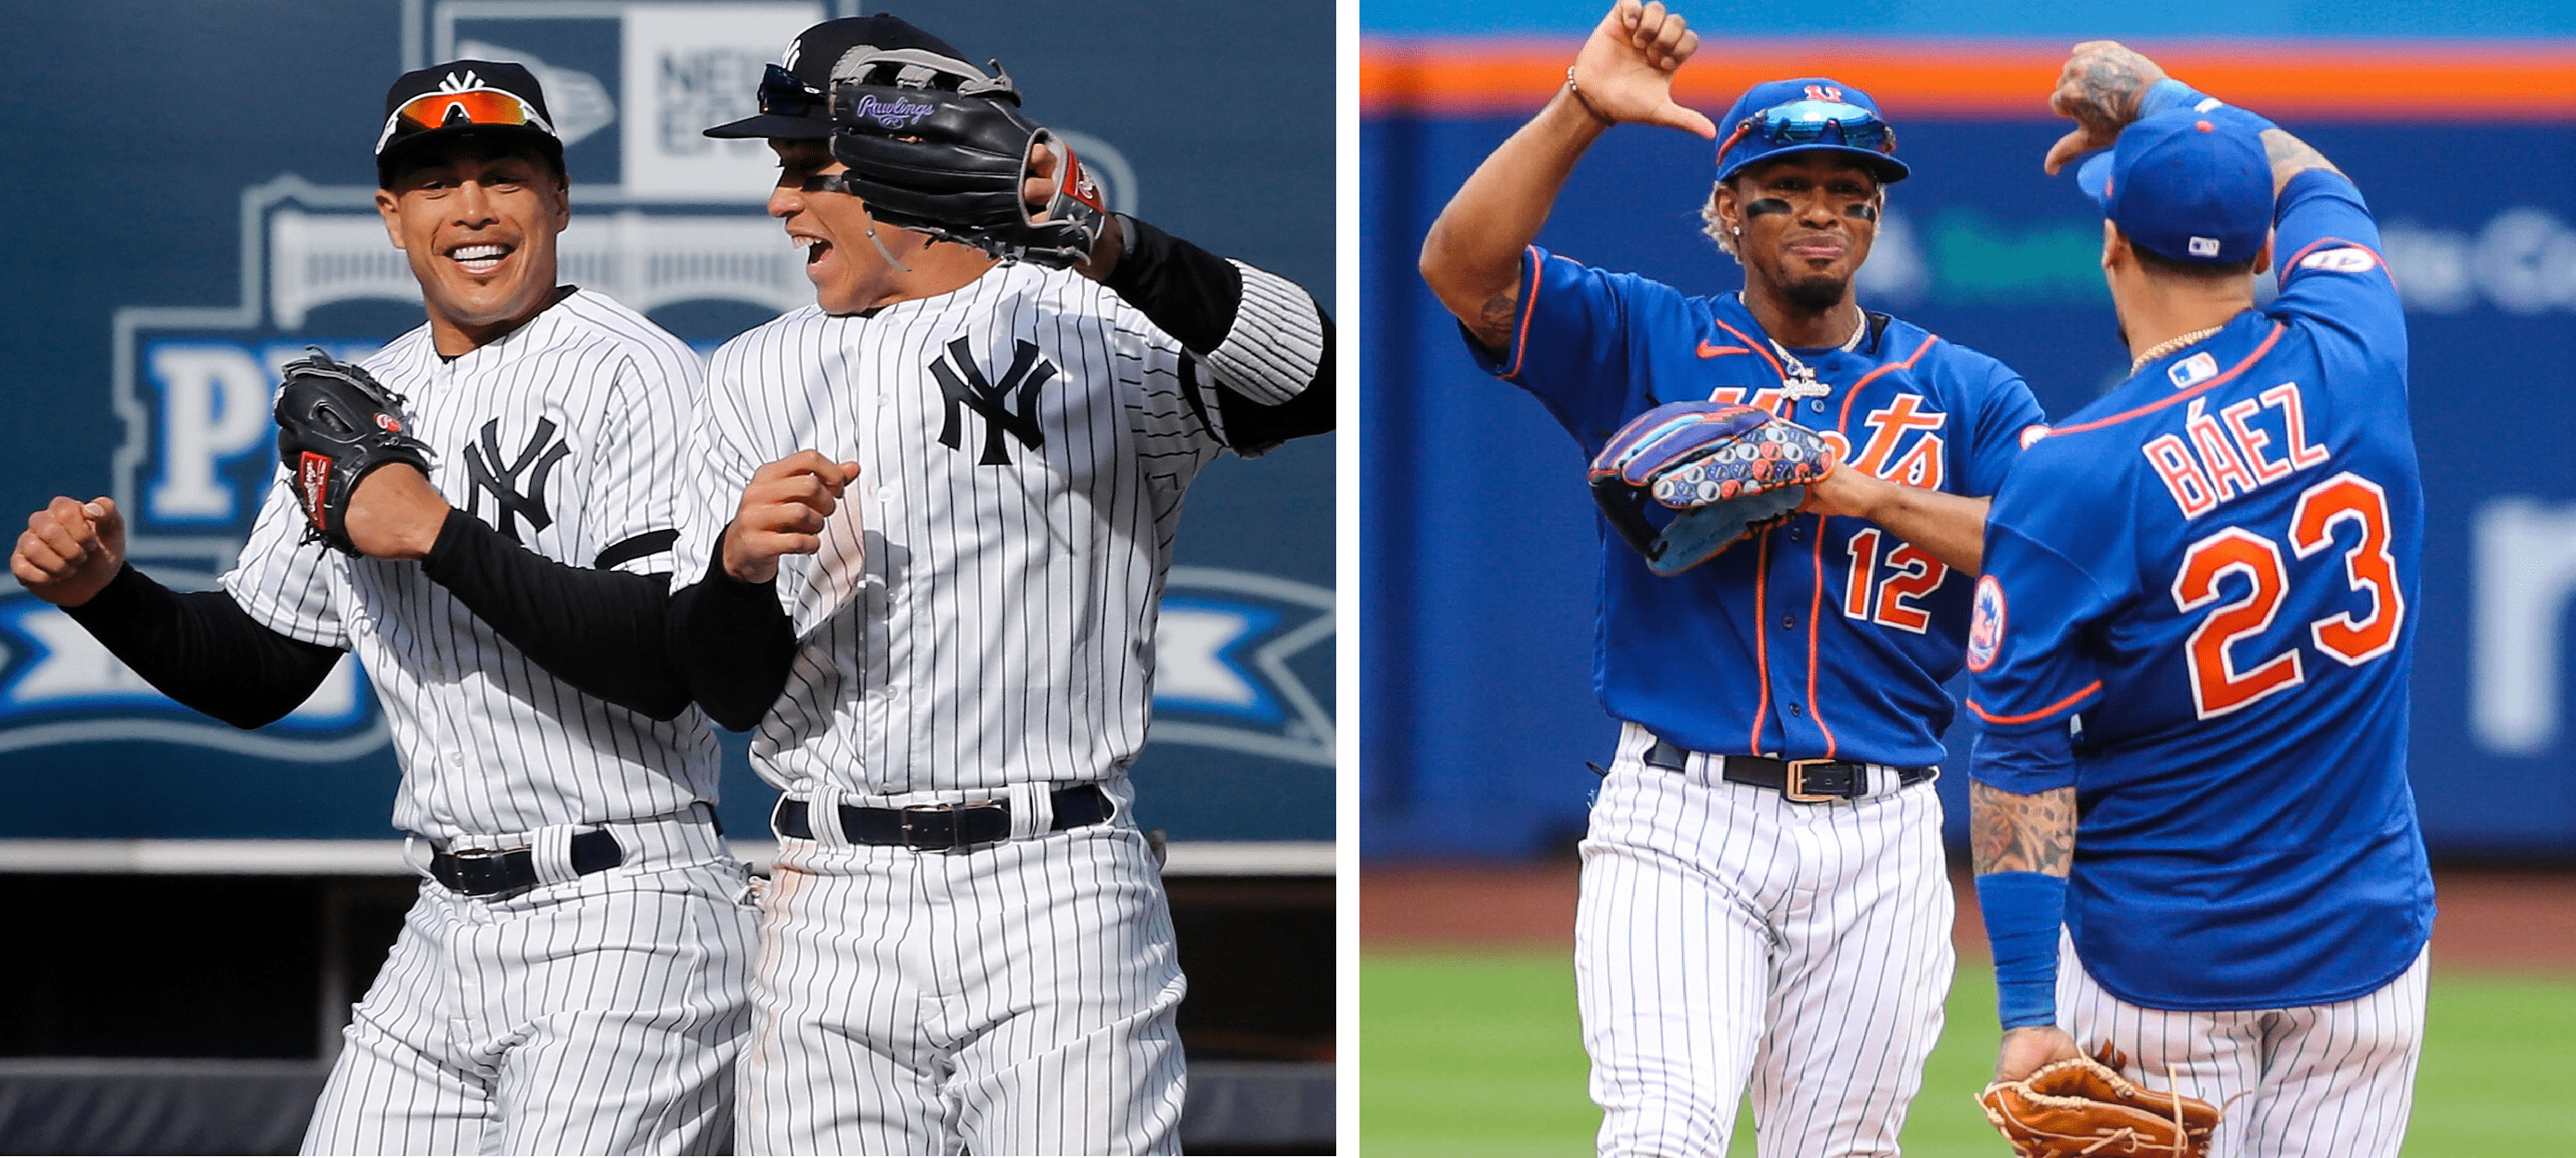 A Look At Performance By Leaders In Yankees Vs. Mets Contest